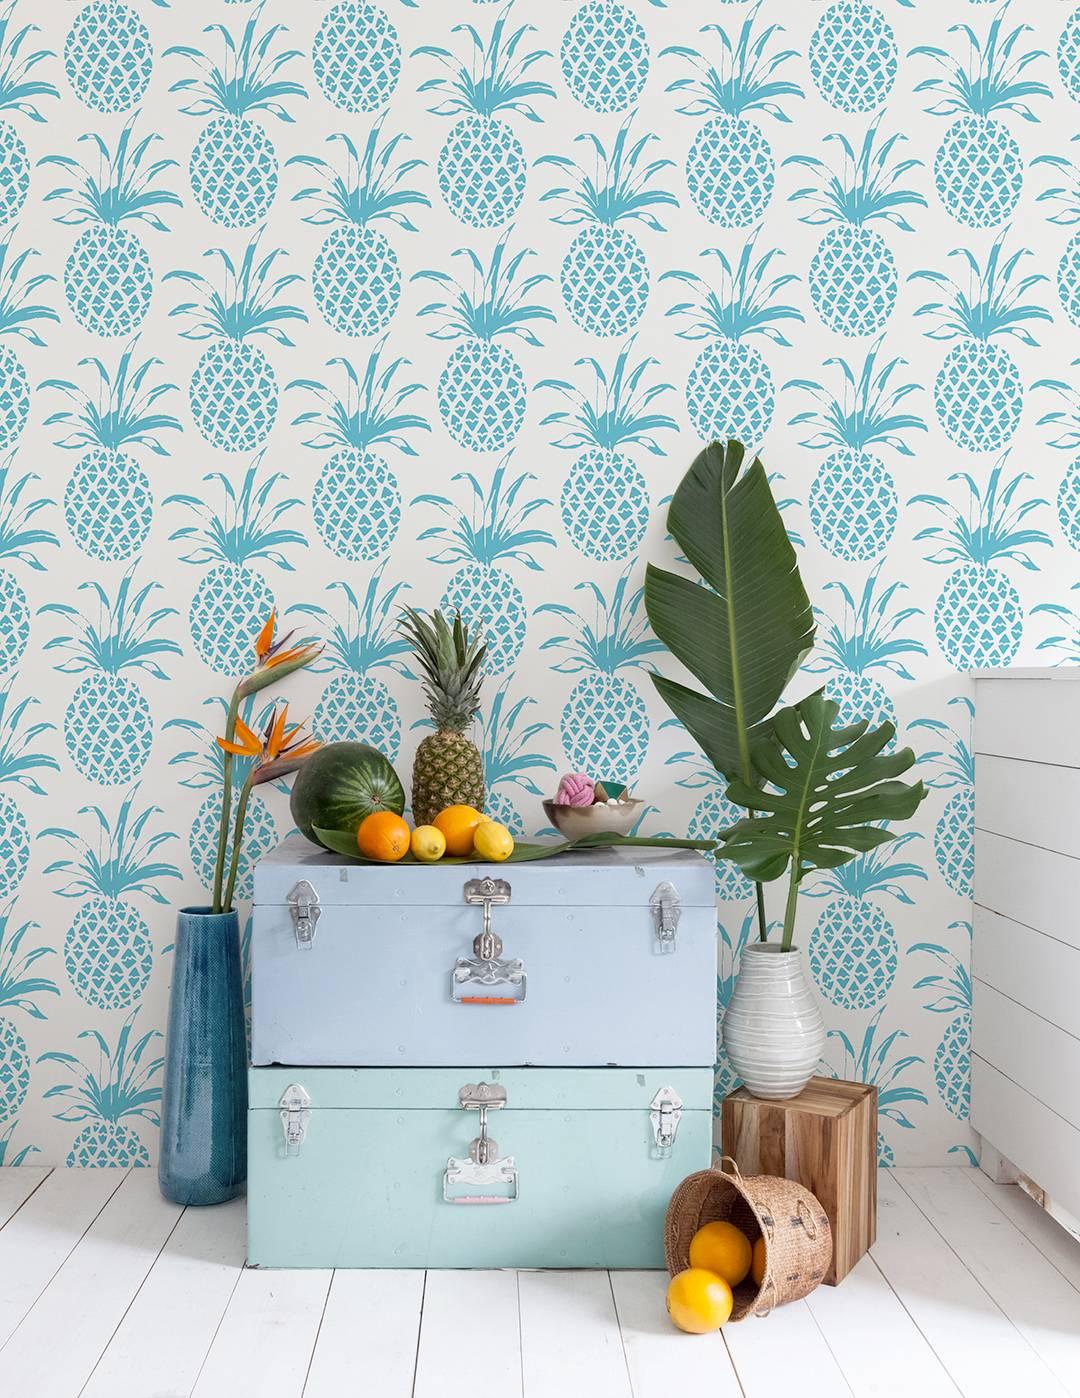 There's no better way to say welcome than with our pineapple wallpaper!
 
Samples are available for $18 including US shipping, please message us to purchase.  

Printing: Digital pigment print (minimum order of 4 rolls), or screen-printed by hand